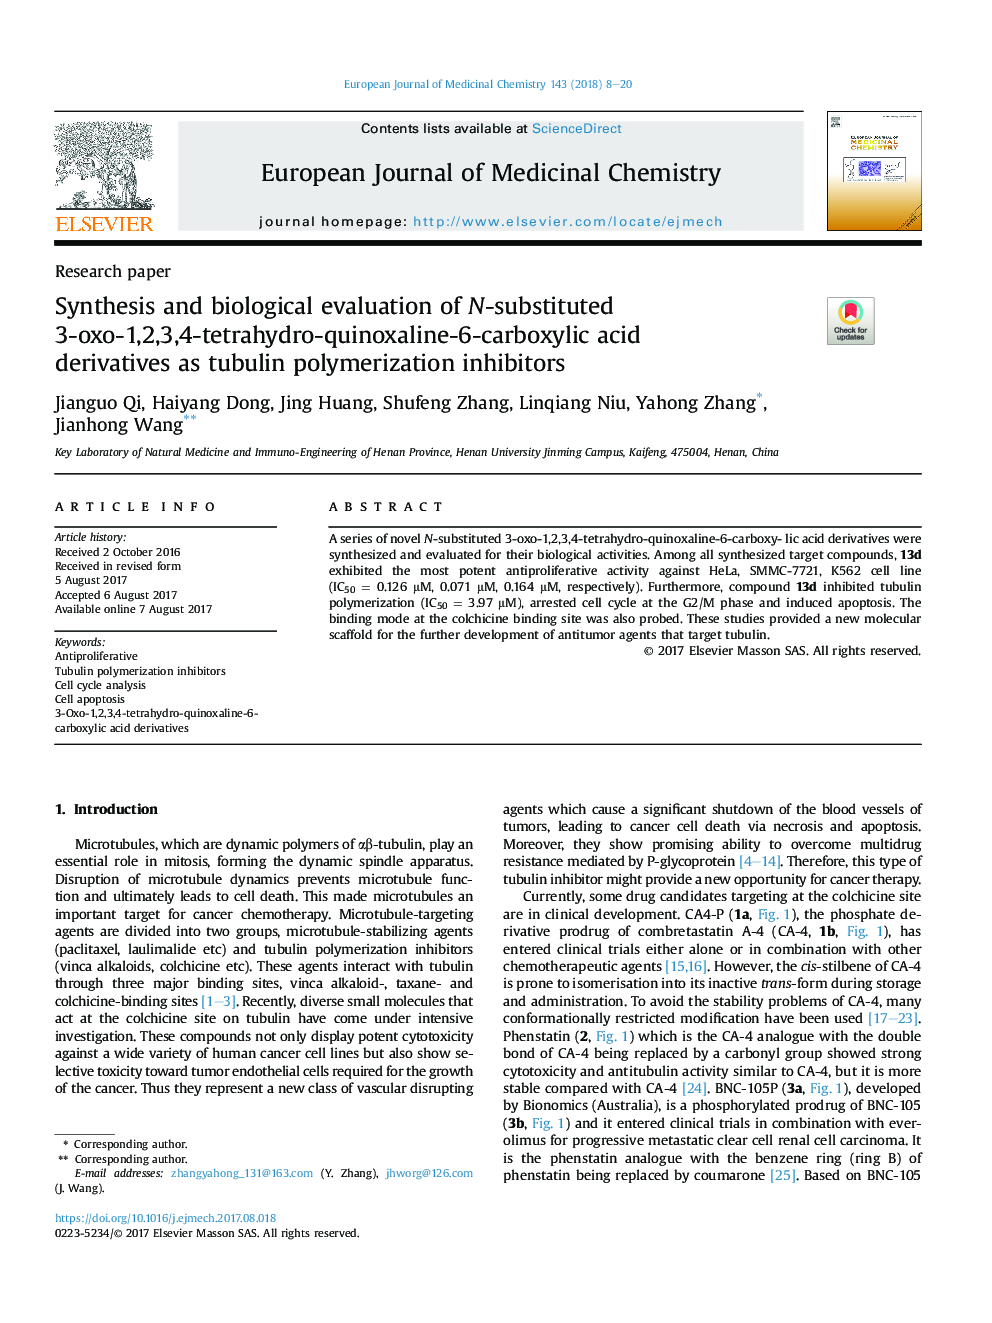 Synthesis and biological evaluation of N-substituted 3-oxo-1,2,3,4-tetrahydro-quinoxaline-6-carboxylic acid derivatives as tubulin polymerization inhibitors